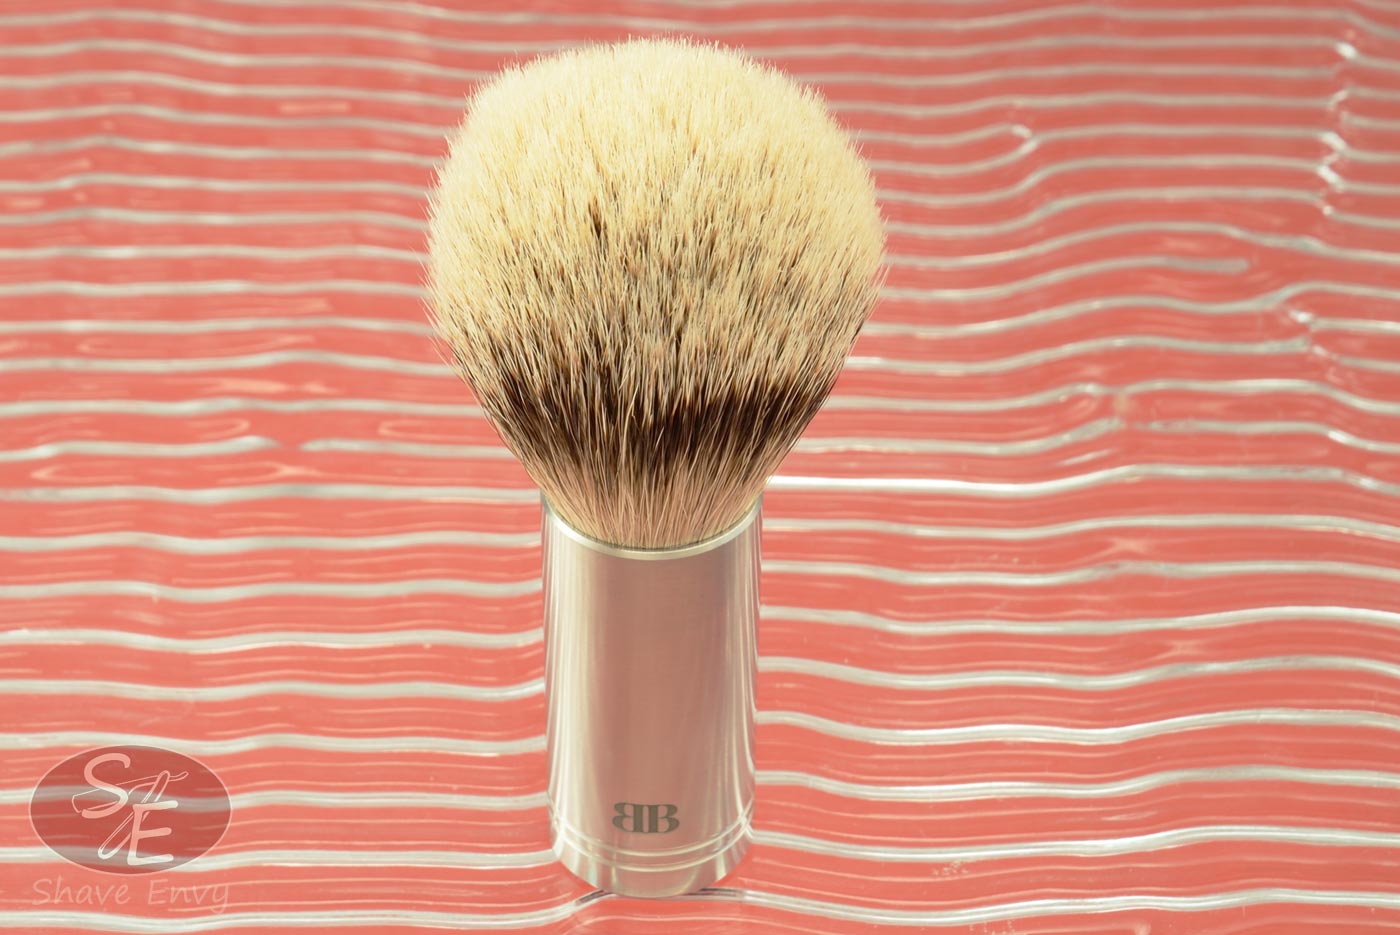 Silvertip Shaving Brush with Brushed Stainless Steel